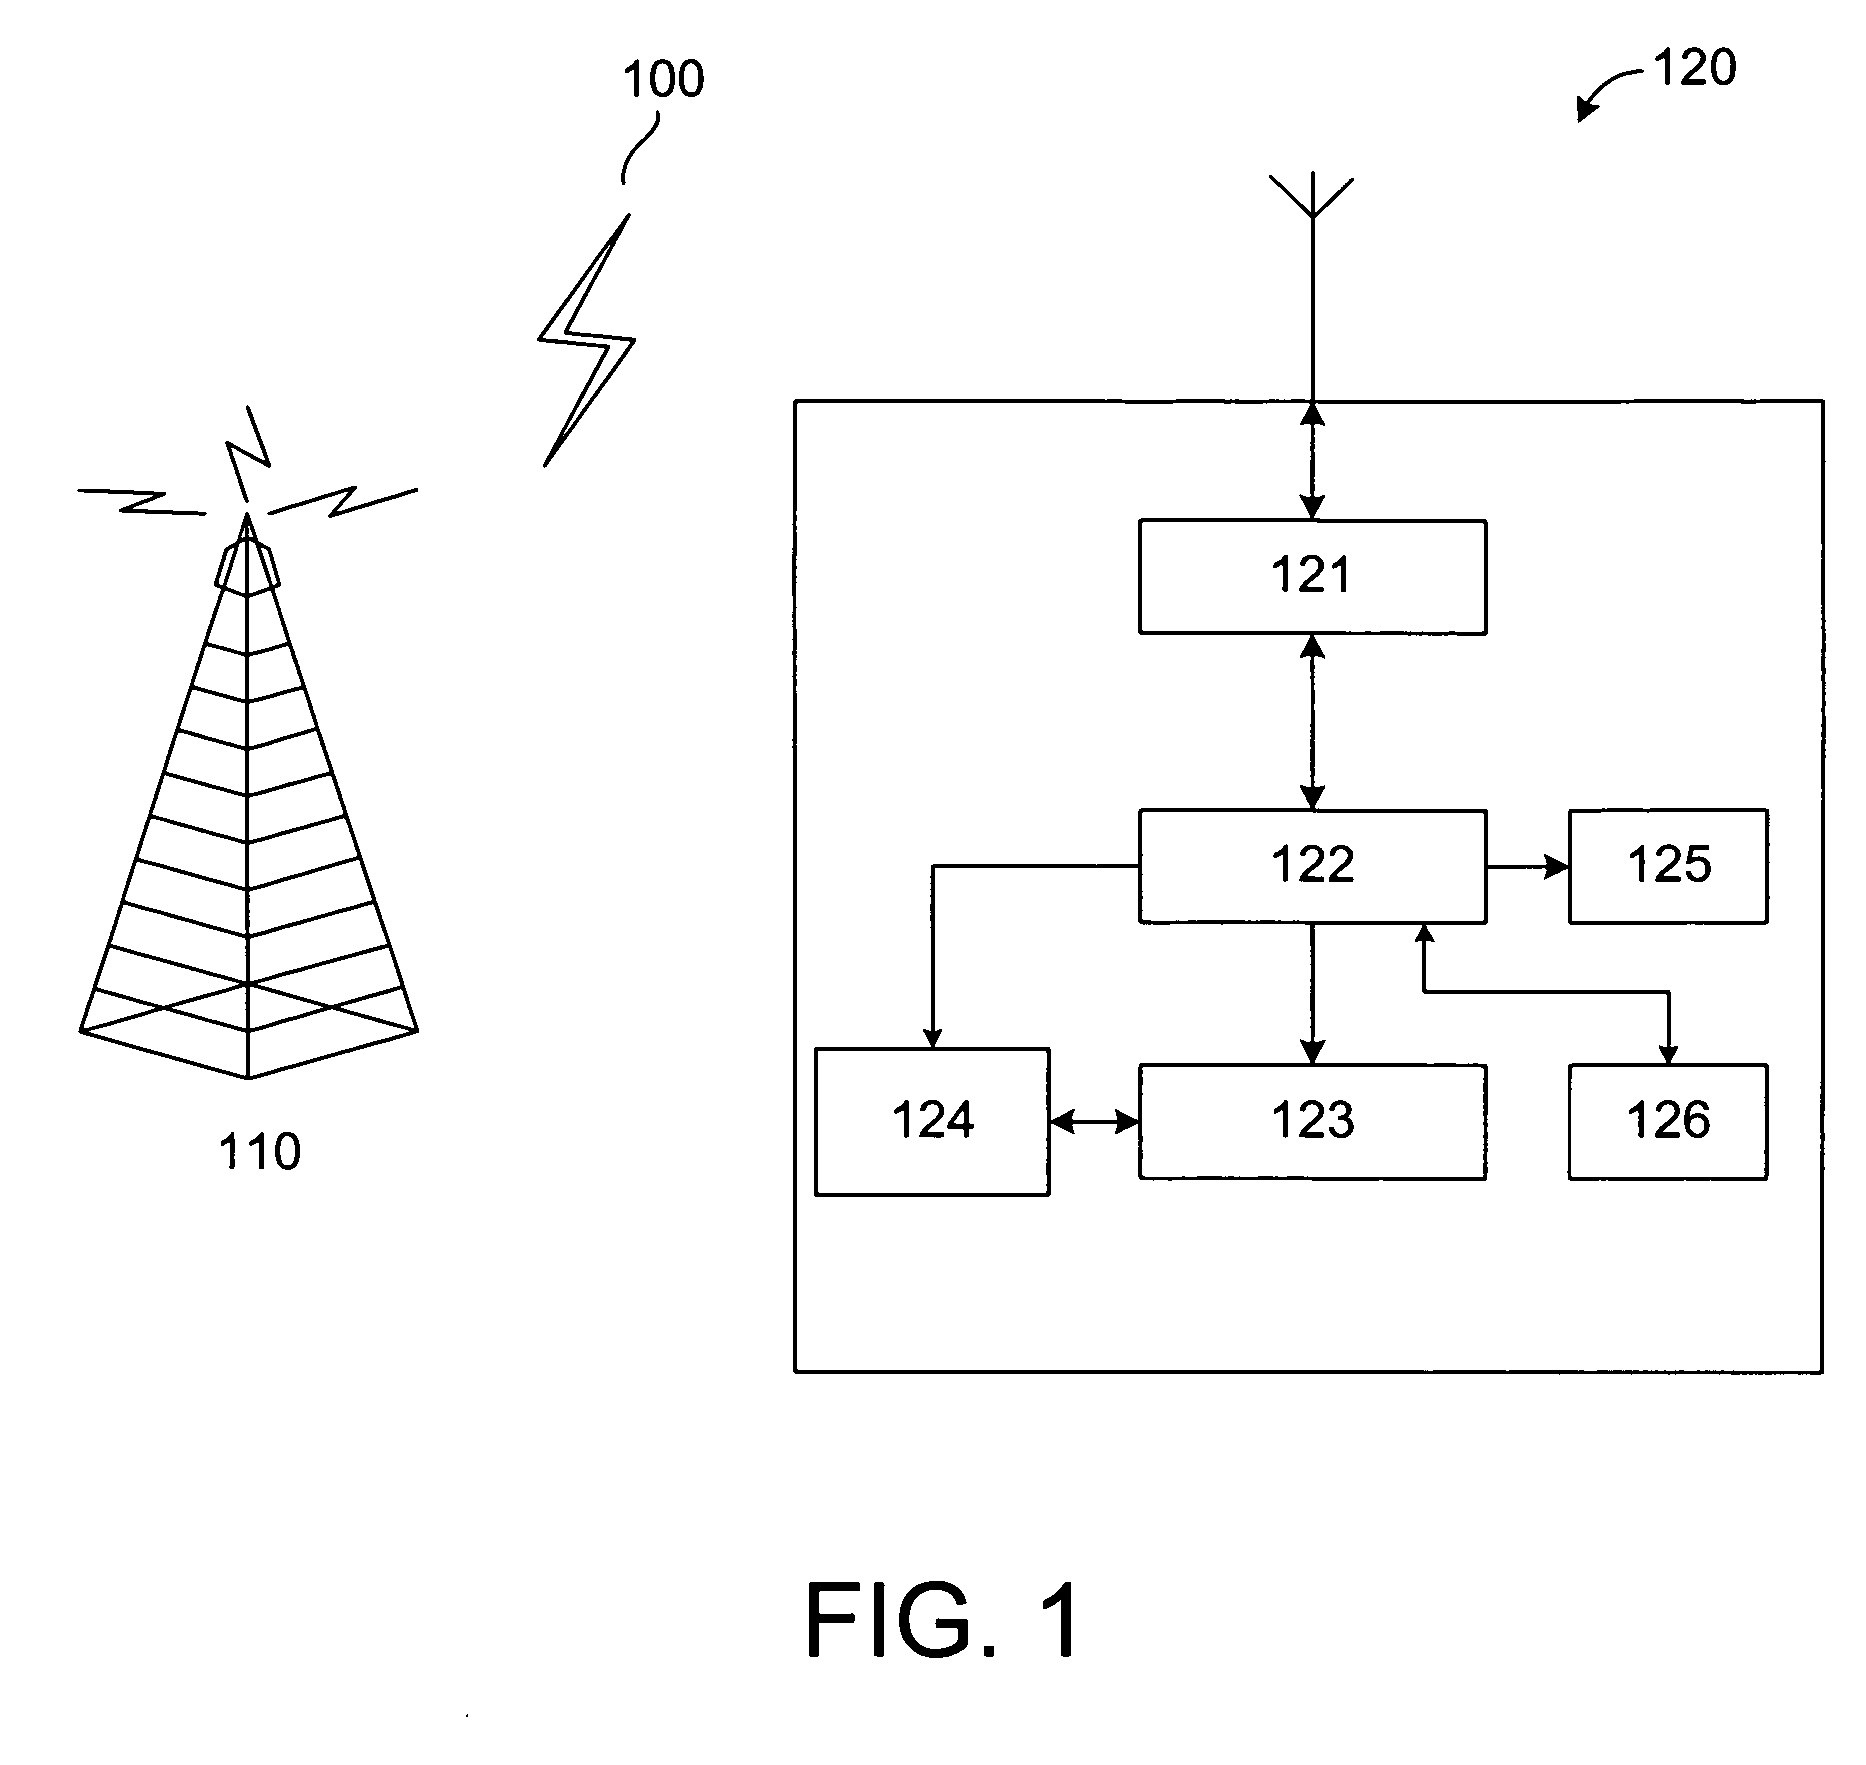 Handheld electronic device and method for firmware upgrade